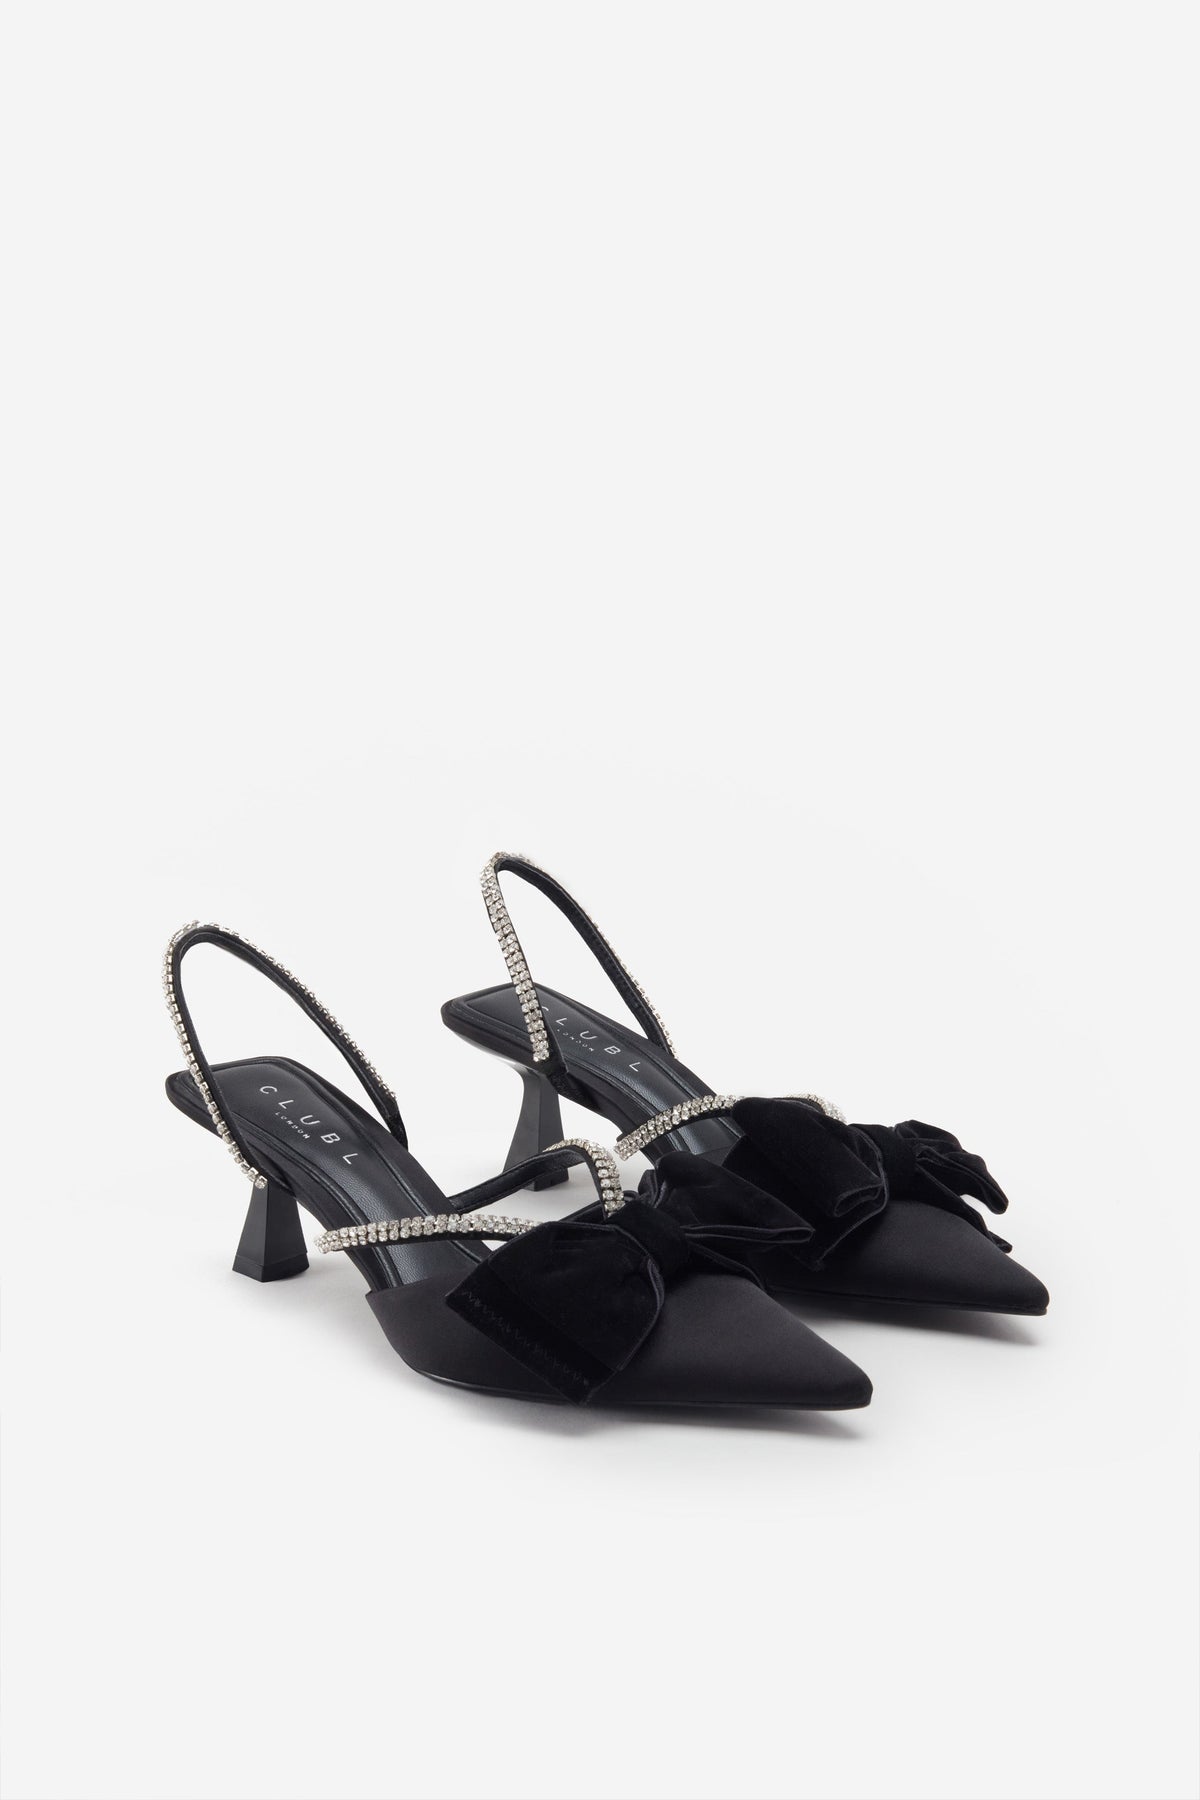 Zara + Flat Slingback Shoes with Bow Detail